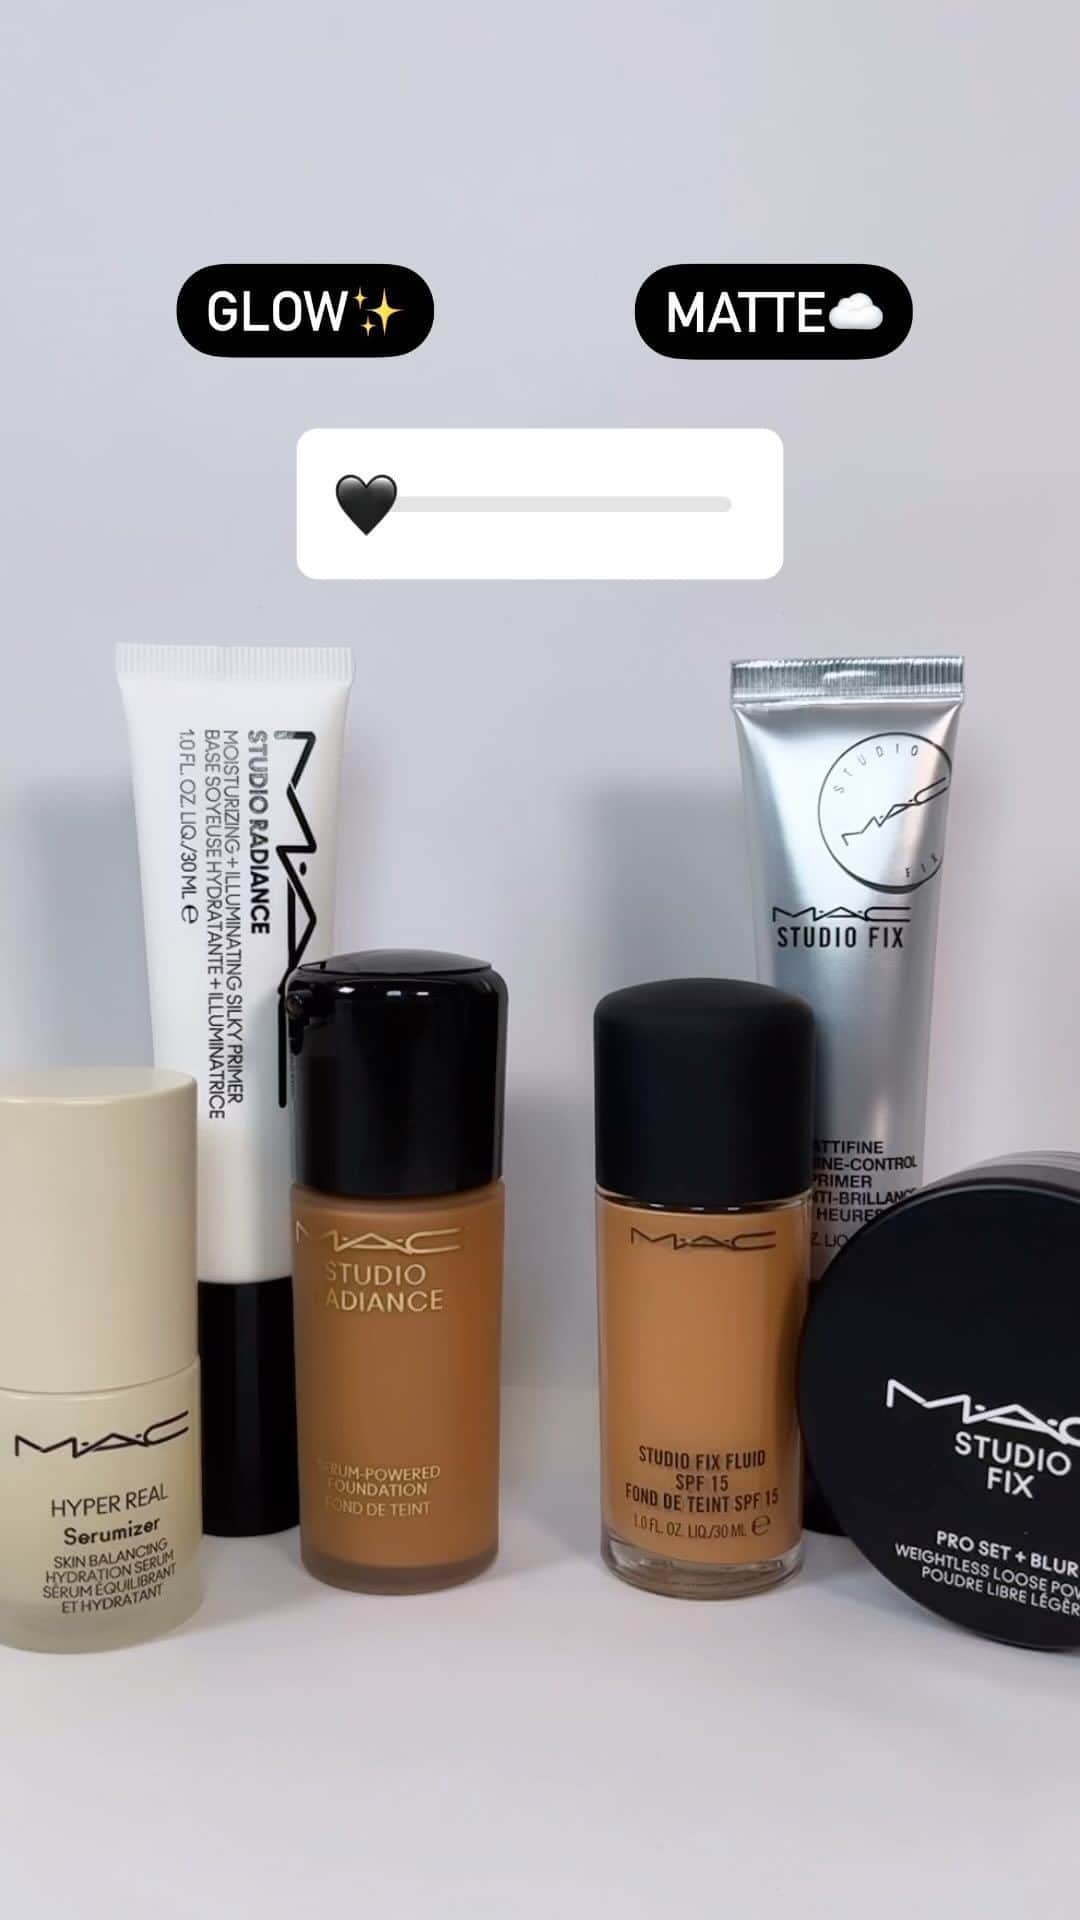 M·A·C Cosmetics UK & Irelandのインスタグラム：「Which team are you? ✨☁️   Whether you’re all about the glow or like to keep it matte we’ve got you covered!   Team Glow: ✨Hyper Real Serumizer™ ✨Studio Radiance Moisturizing + Illuminating Silky Primer ✨NEW Studio Radiance Serum-Powered™ Foundation   Team Matte: ☁️Studio Fix Mattifine12HR Shine Control Primer ☁️Studio Fix Fluid SPF15 Foundation ☁️Studio Fix Pro Set + Blur Weightless Loose Powder     #MACCosmeticsUK #MACStudioRadiance #MACStudioFix」